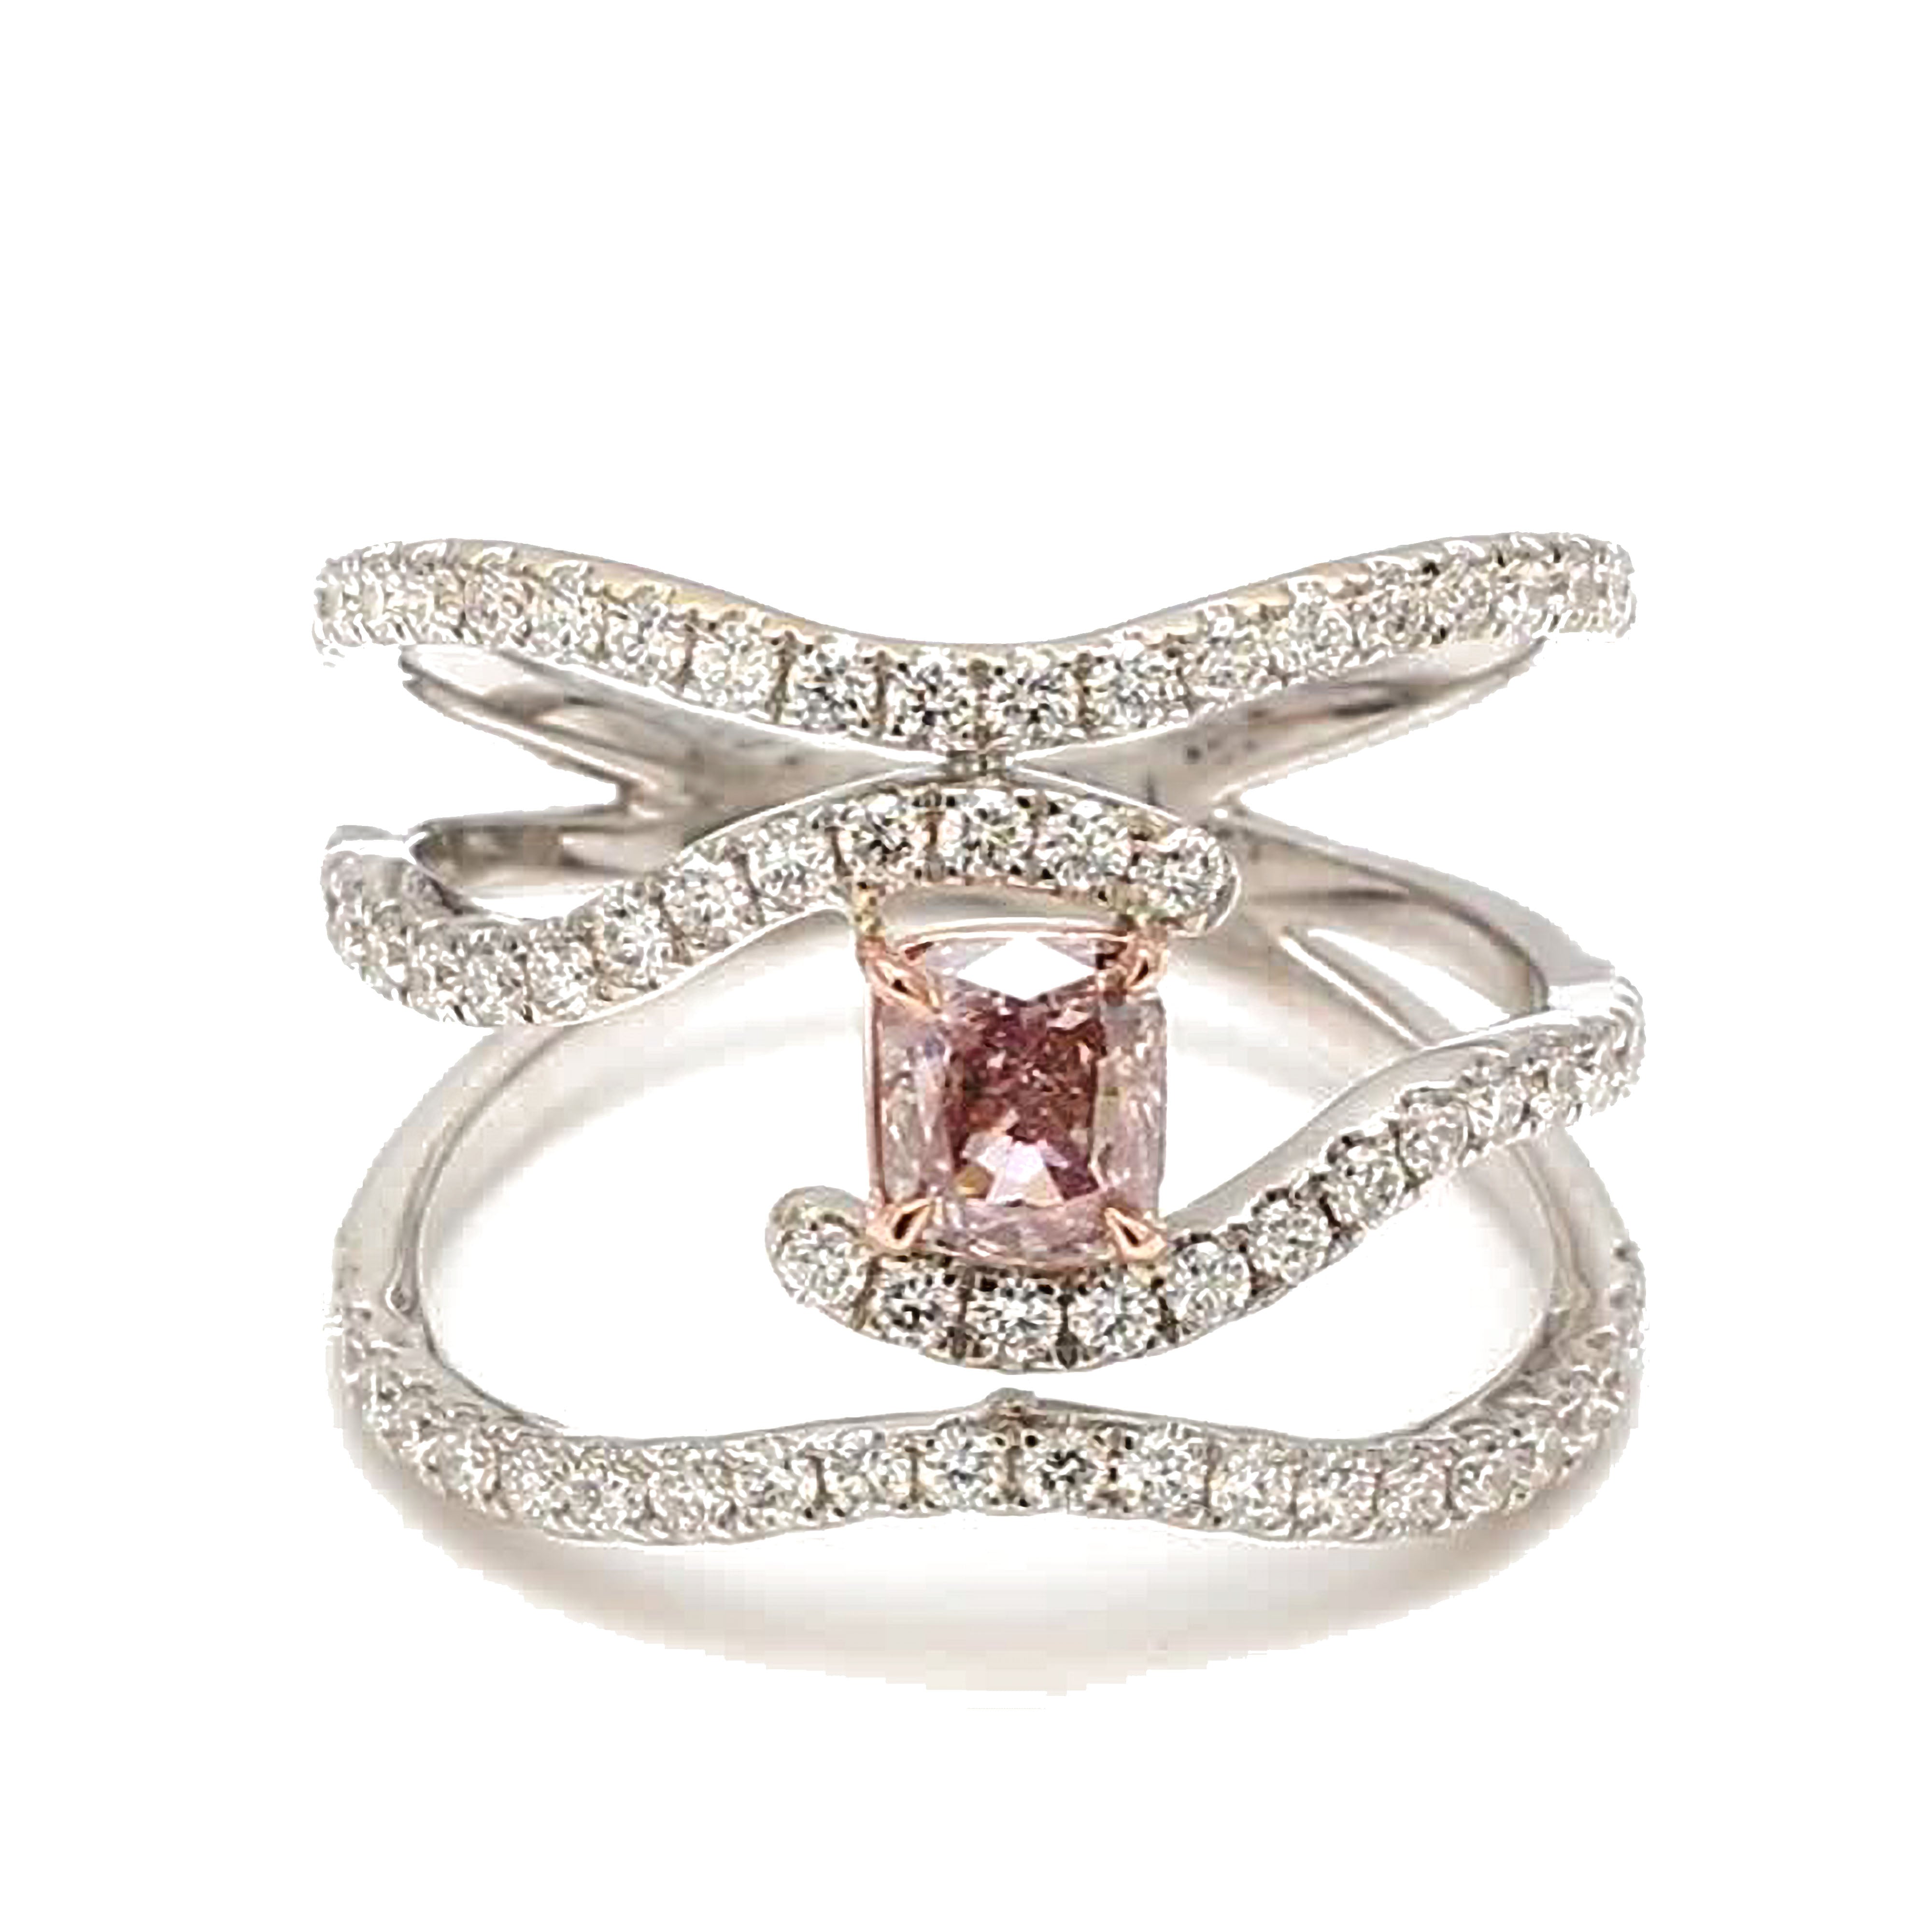 GIA Certified Natural Pink Cushion and White Diamond 1.28 Carat TW Gold Ring